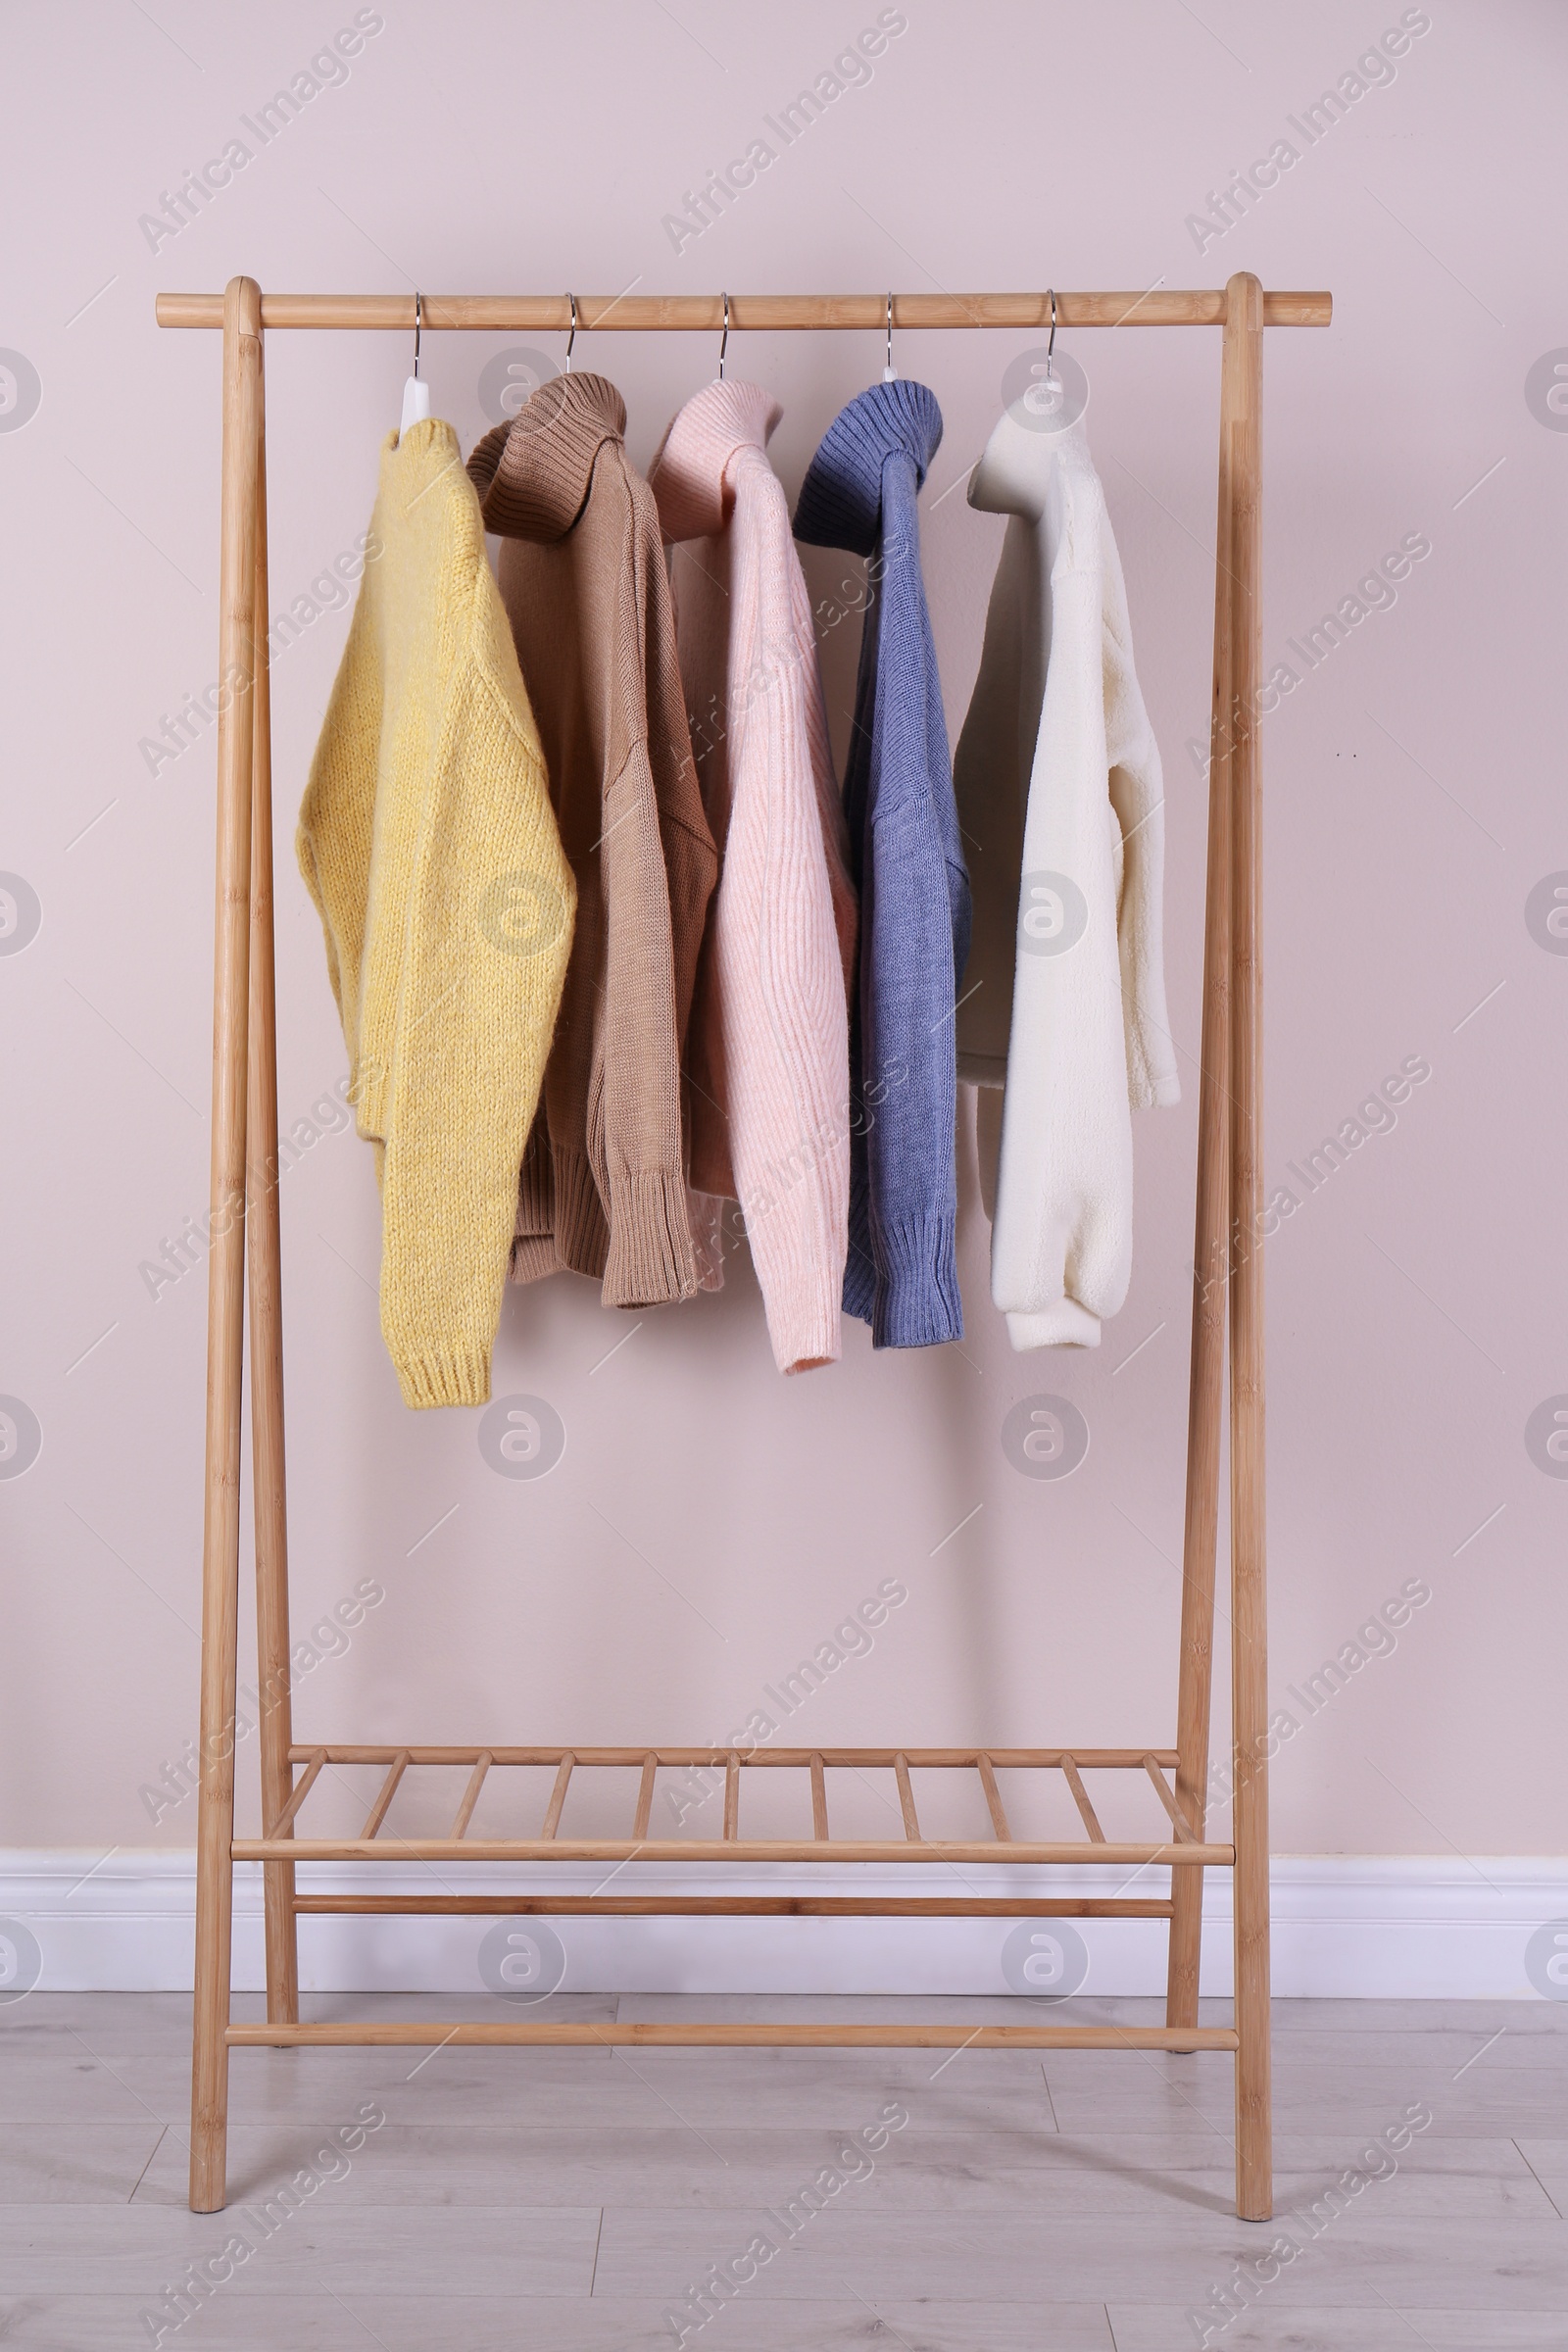 Photo of Warm sweaters hanging on wooden rack near pink wall